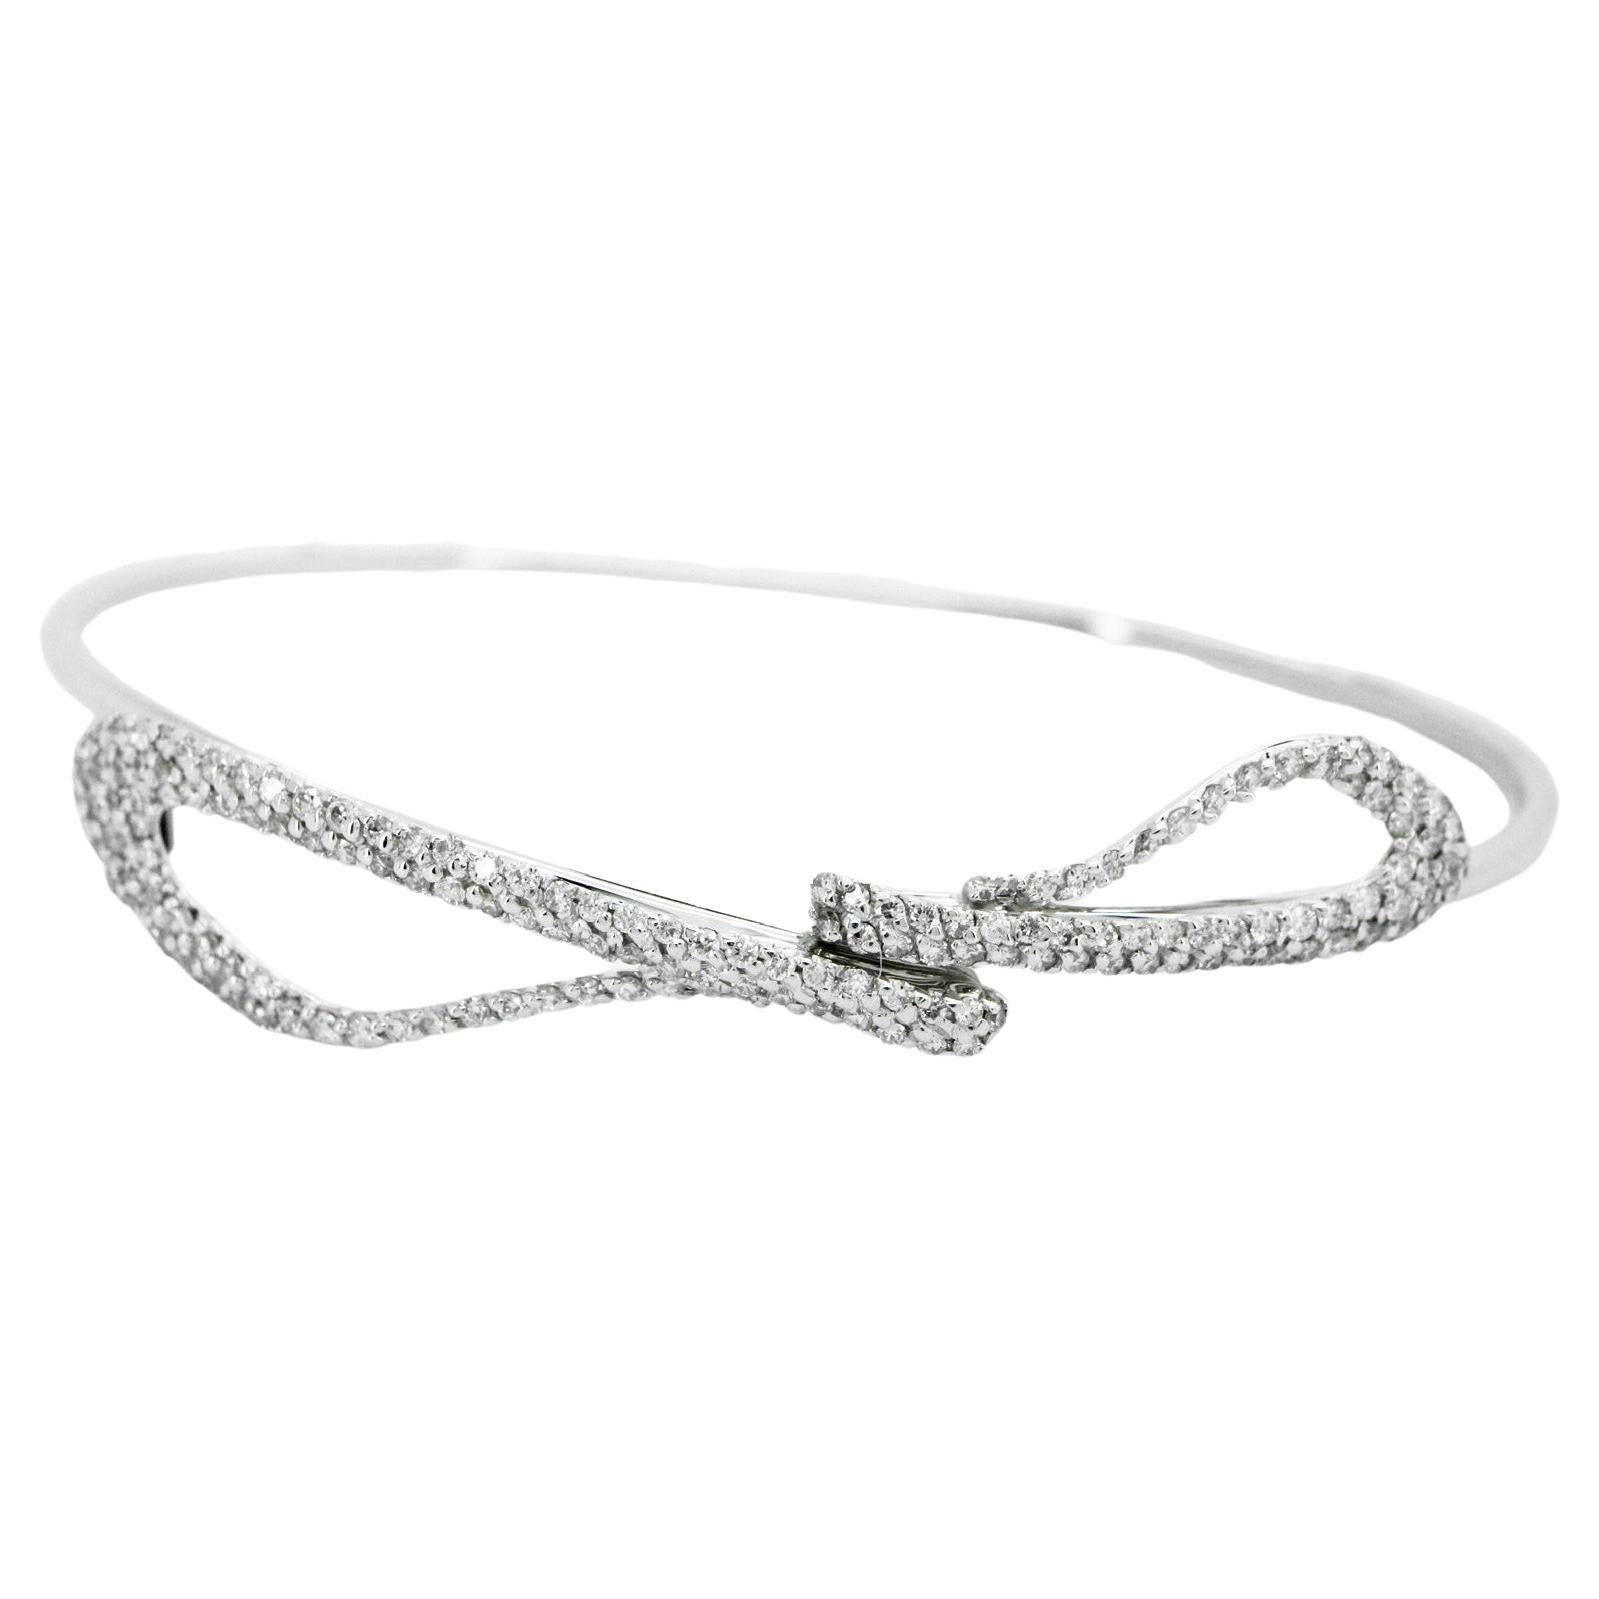 Beatrice Barzaghi Diamond Pave White Gold Ethereal Delicate Cuff Bracelet For Sale